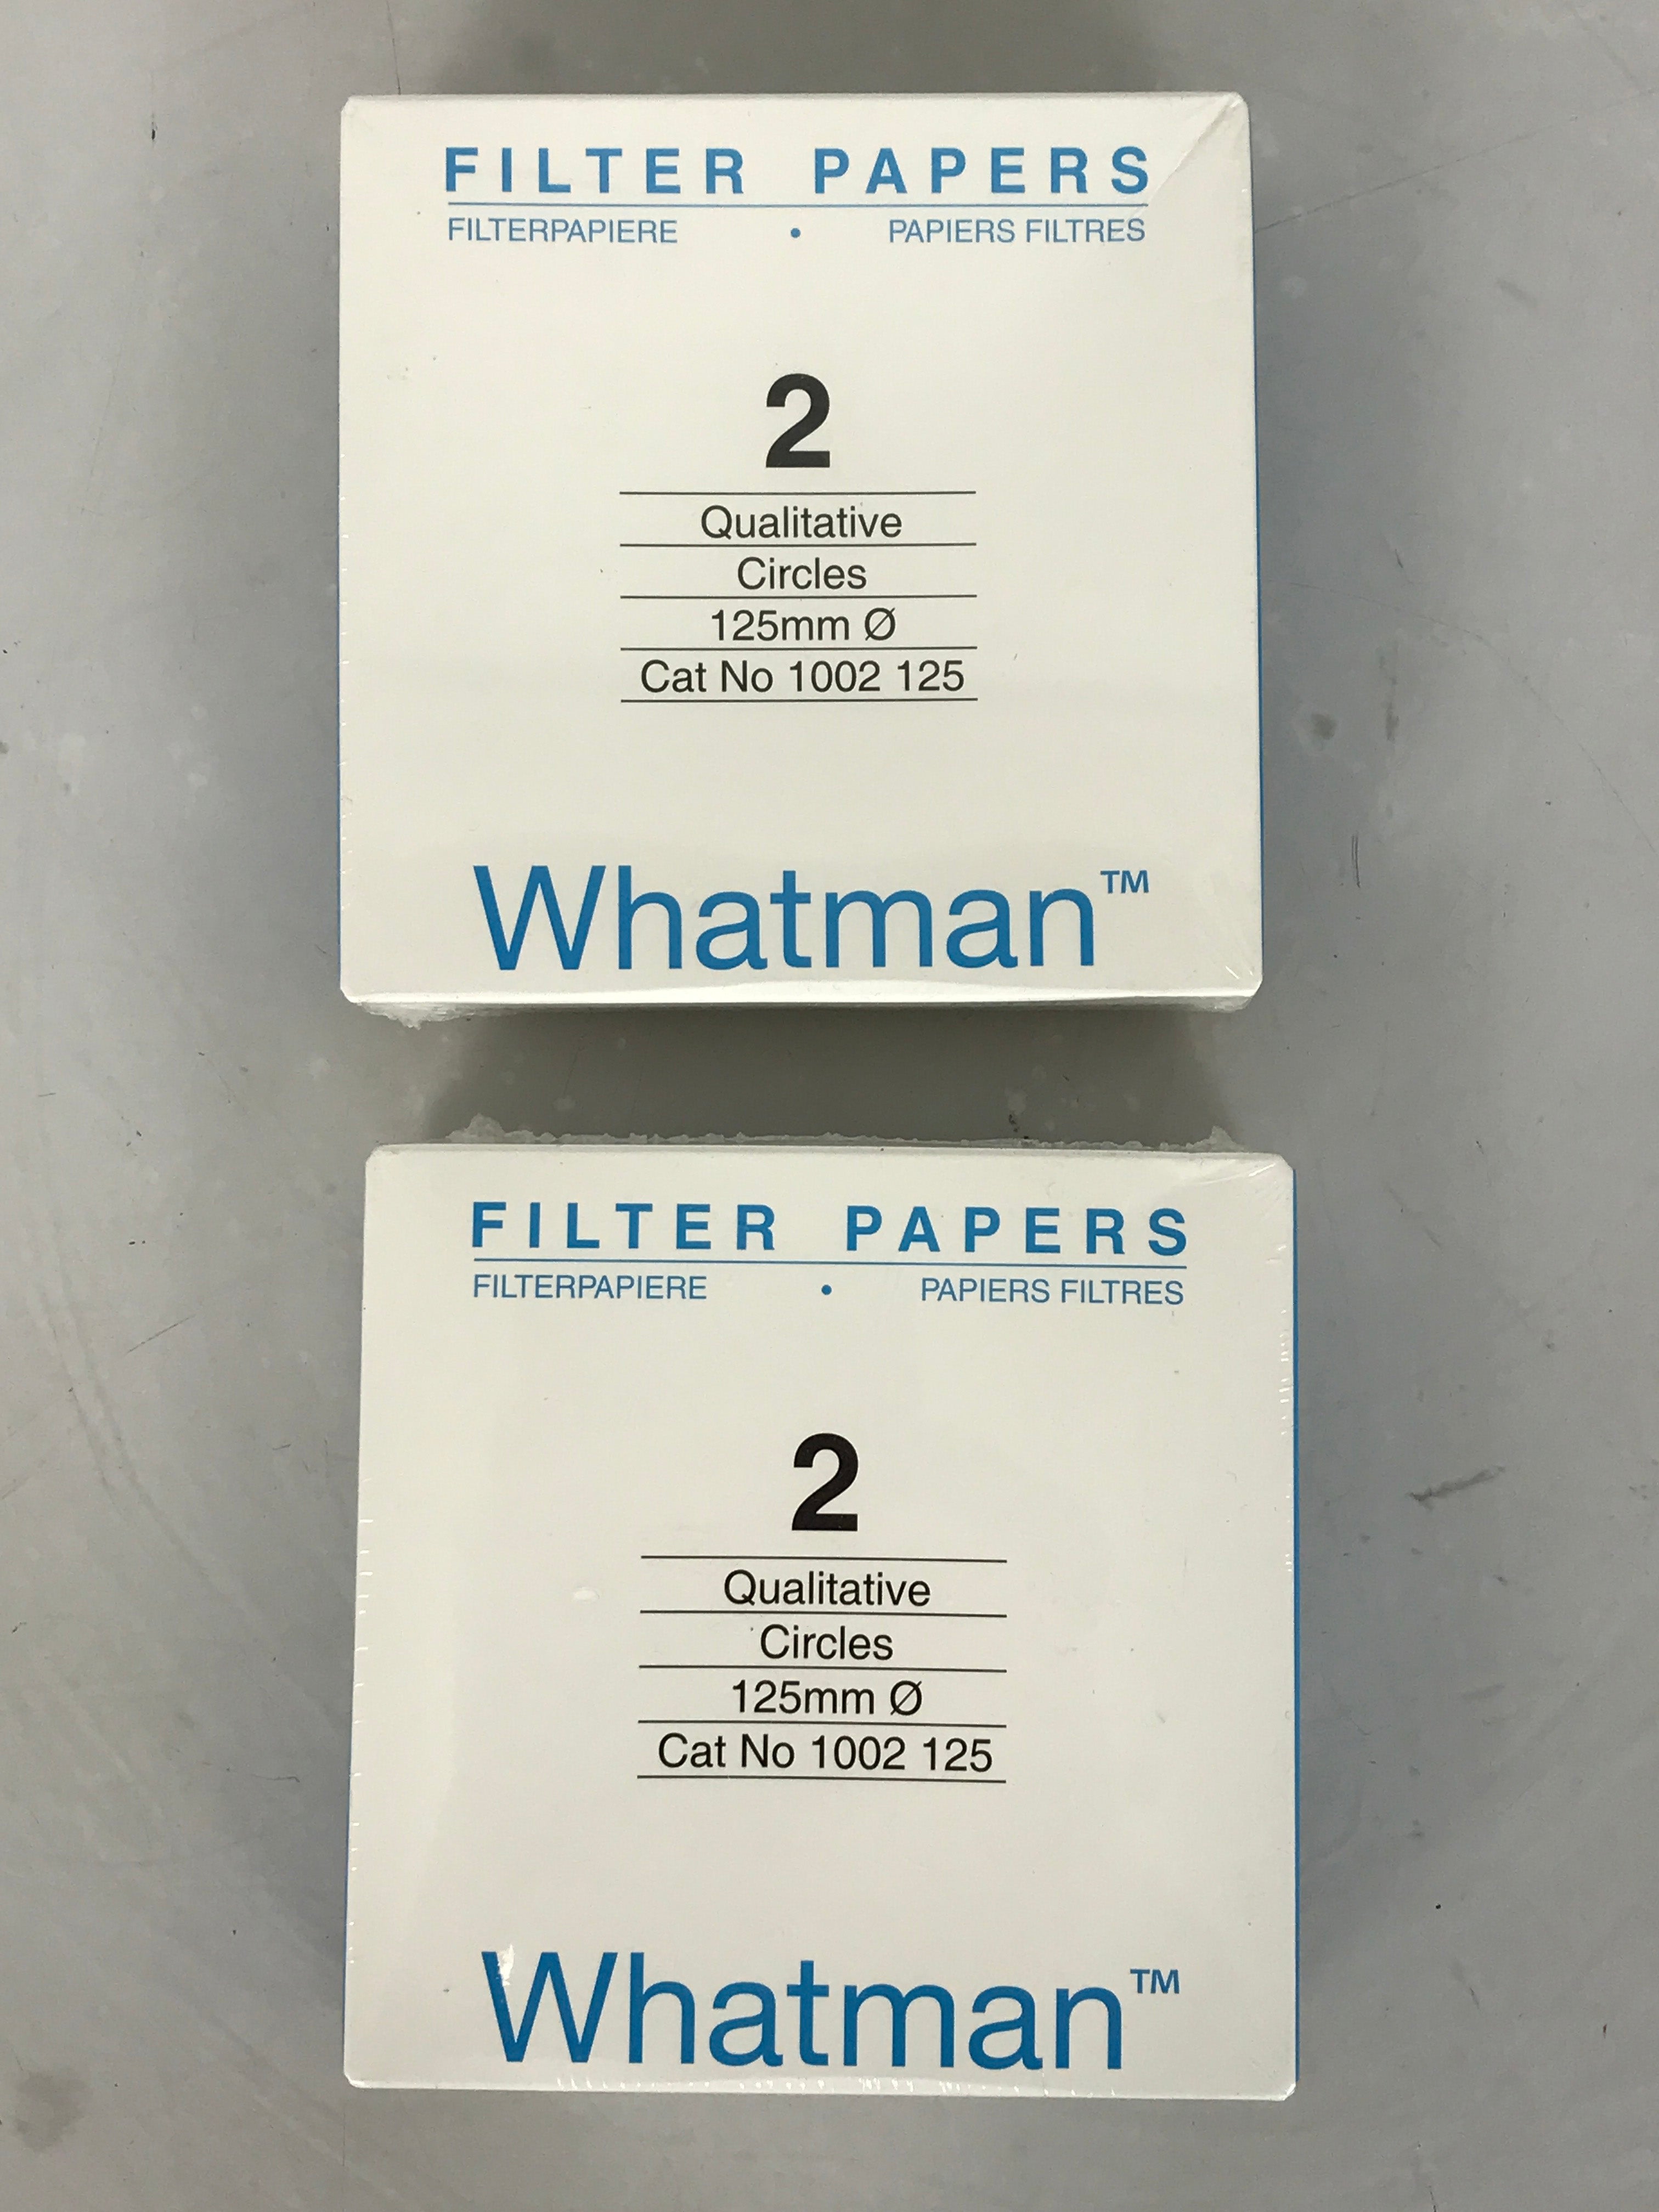 2 Packs of Whatman Filter Papers 125mm Circles Cat. 1002 125  *Sealed*